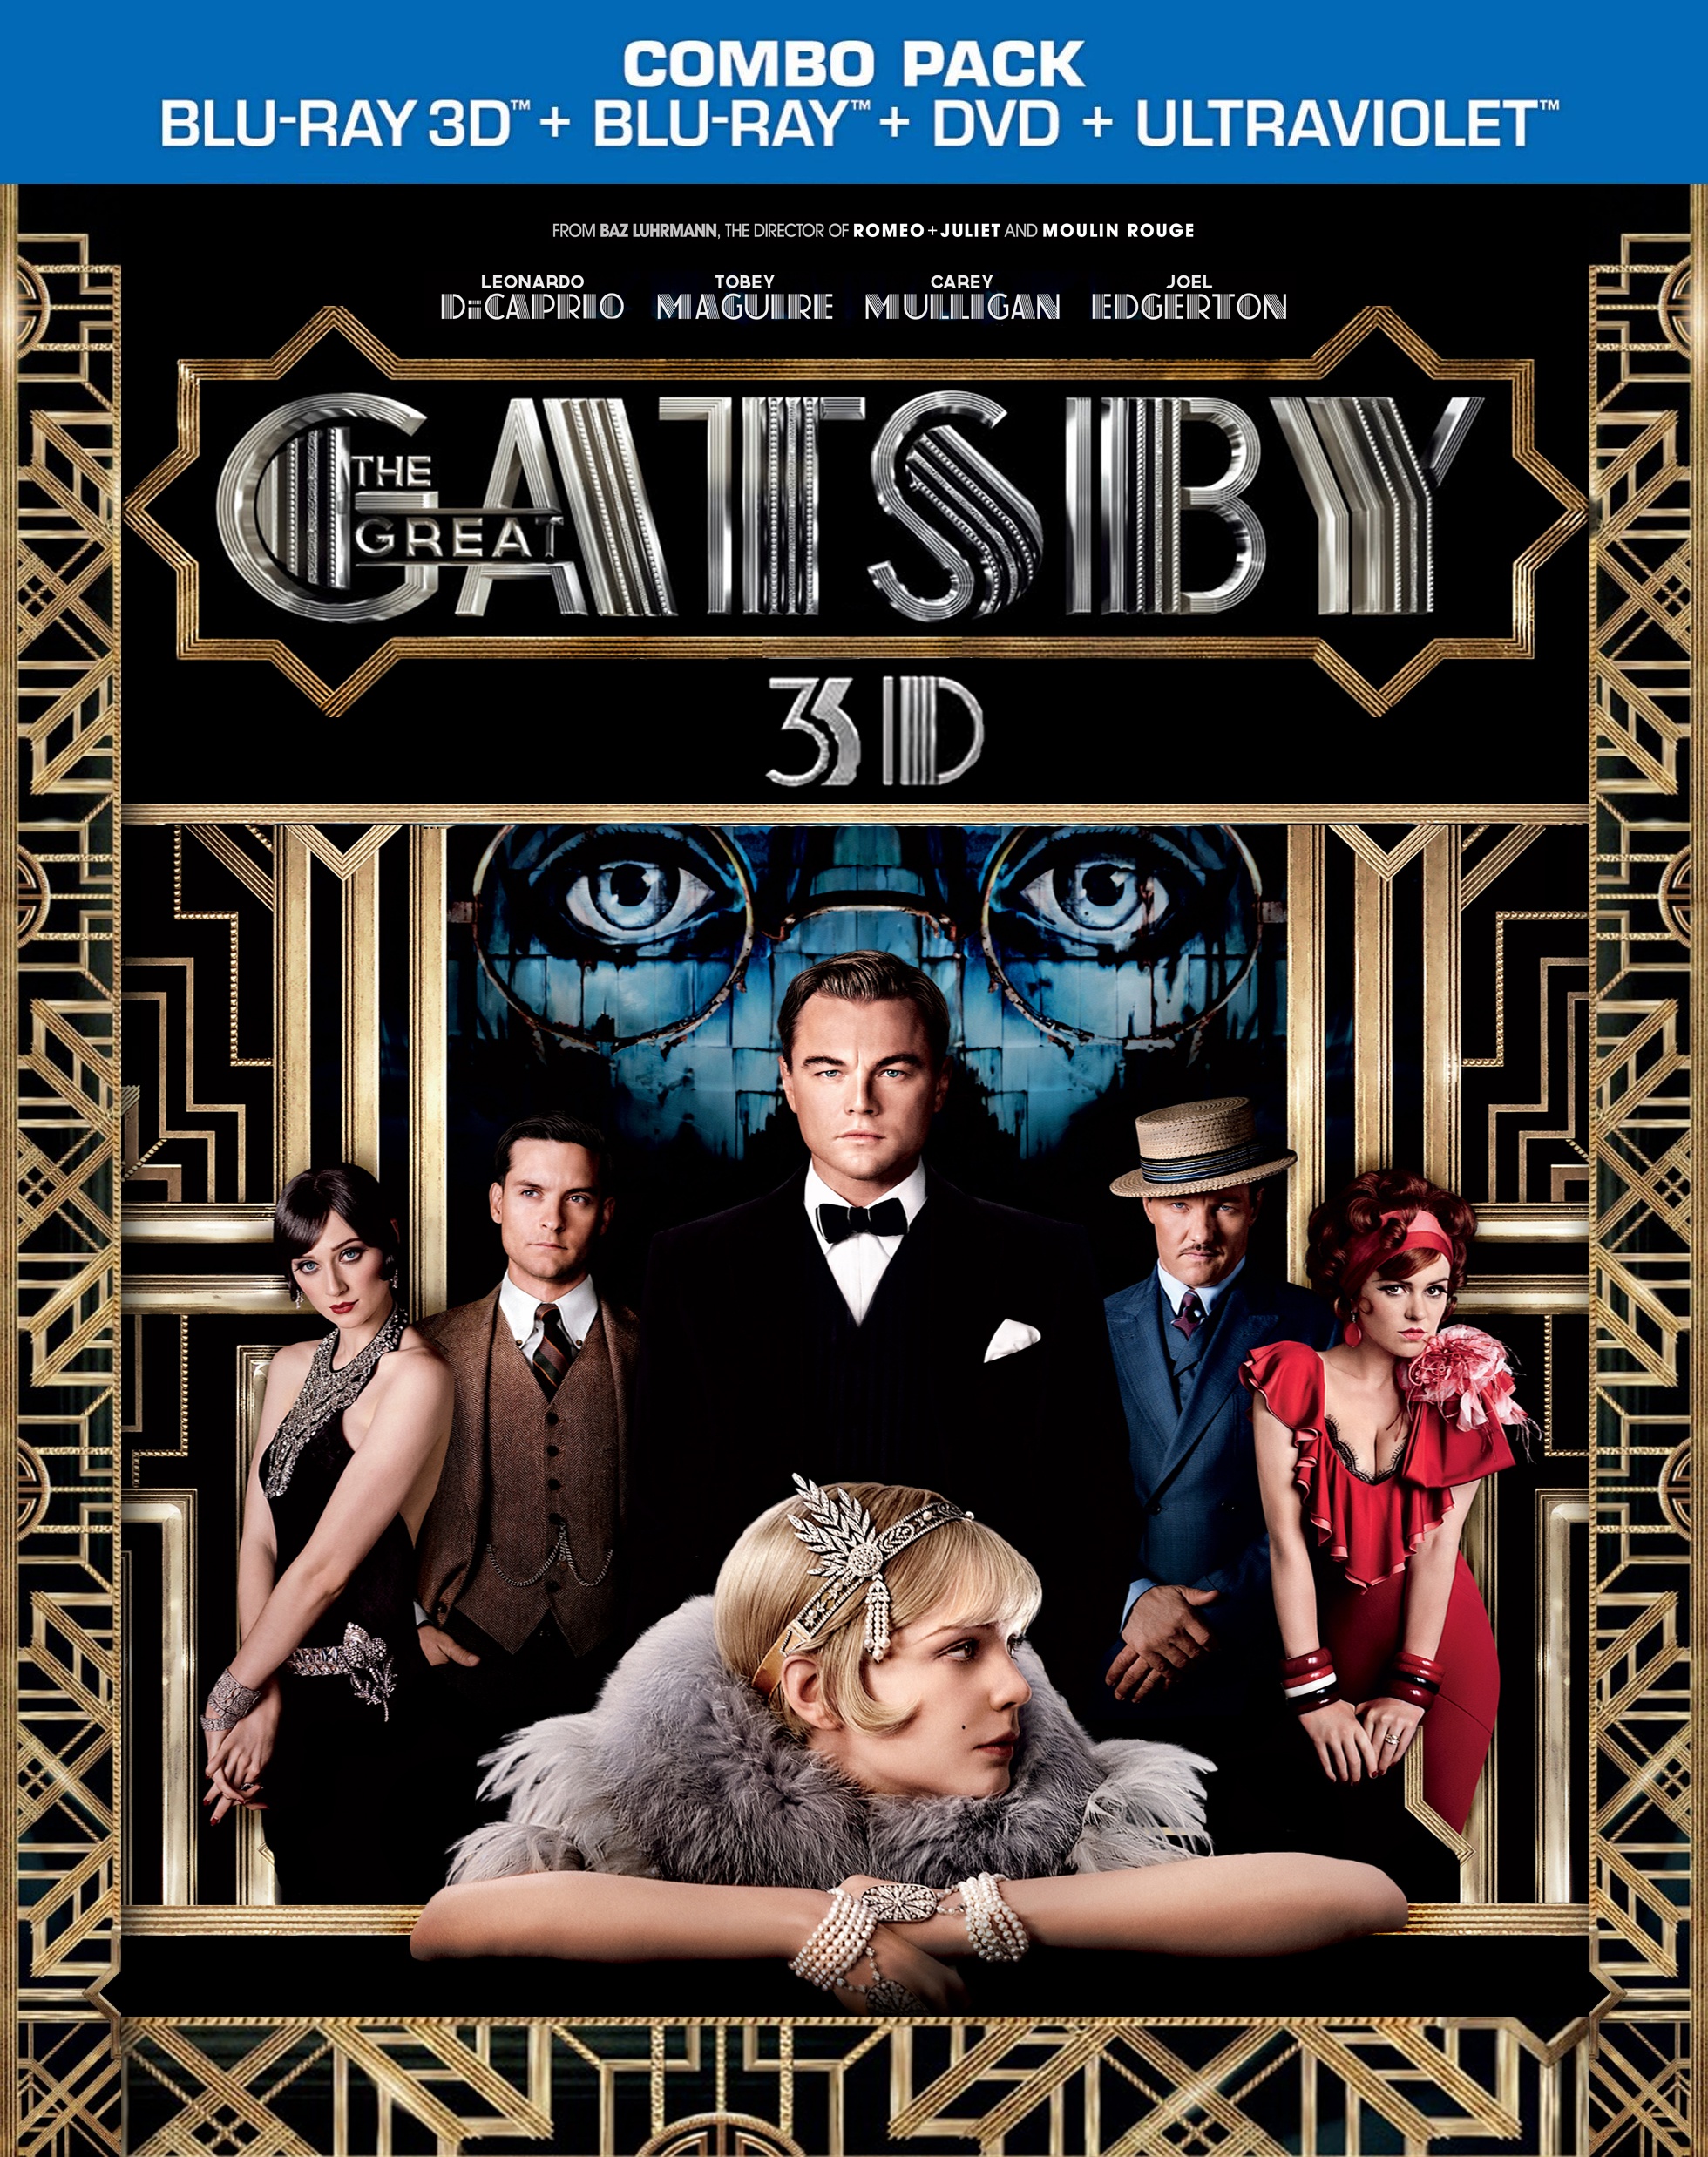 The Great Gatsby 3D (2013) Blu-ray box cover